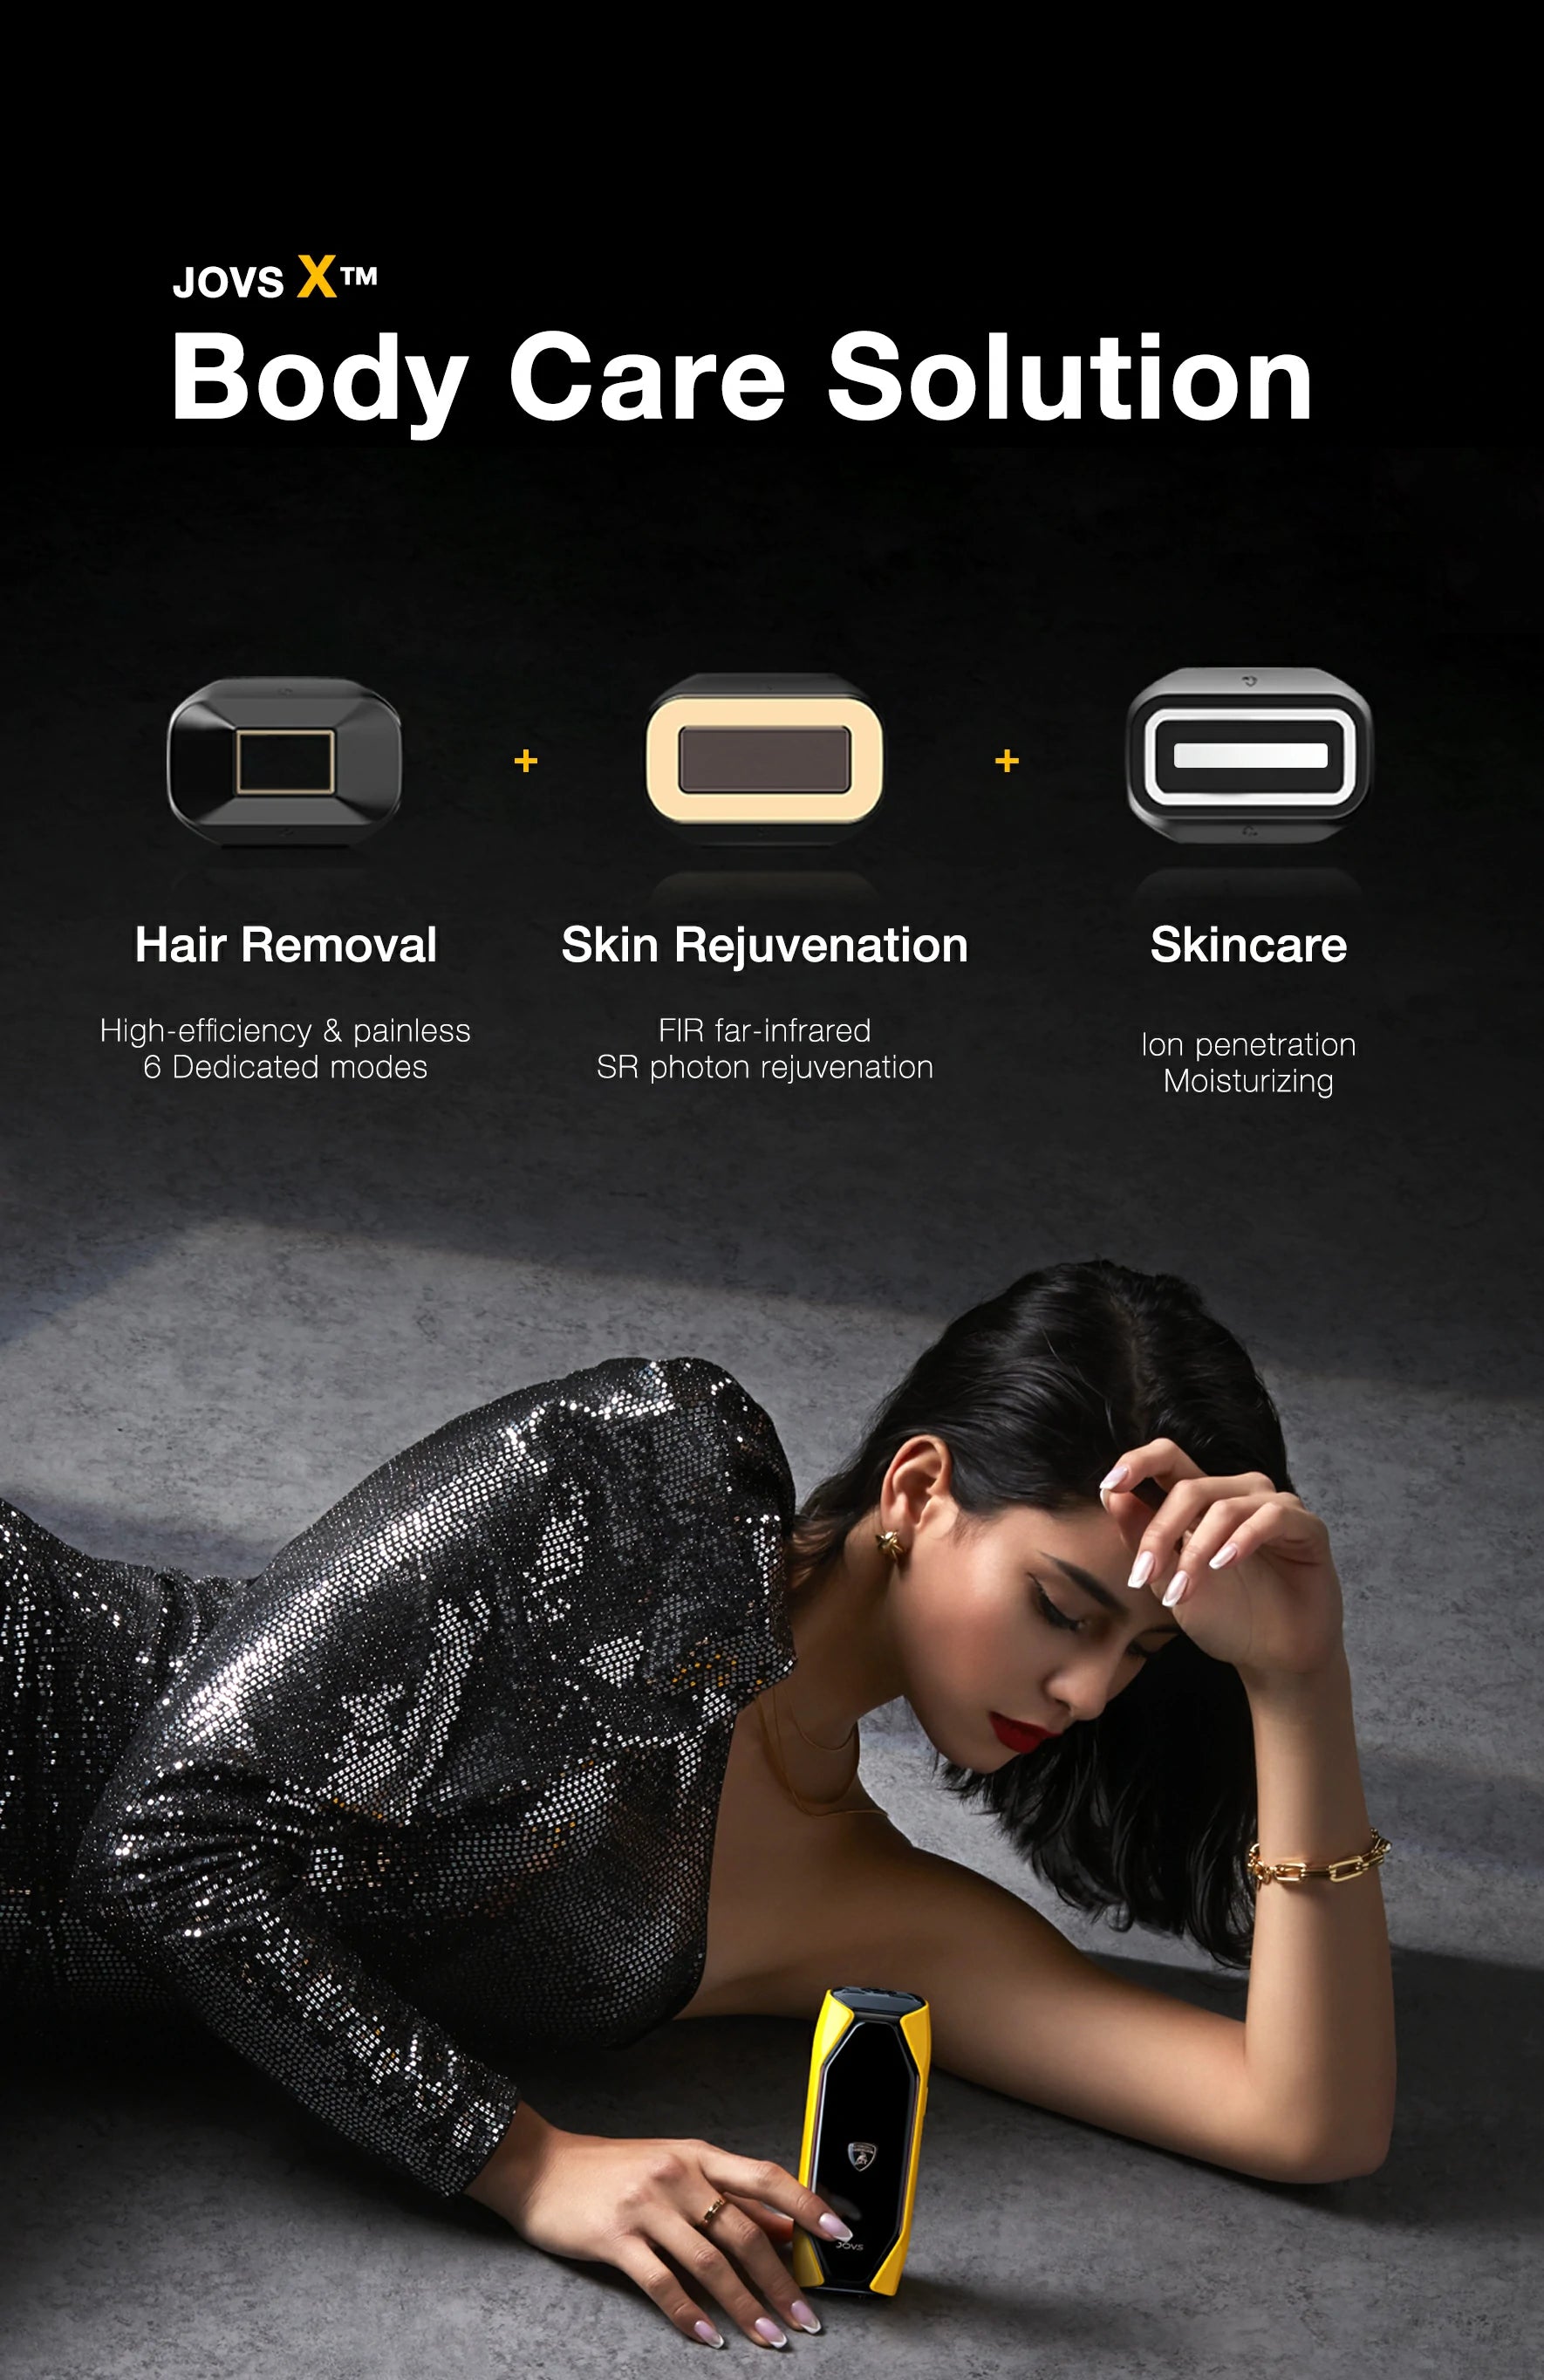 Elegant model reclining with JOVS X™ Hair Removal Device, demonstrating the multi-functional body care solution for hair removal, skin rejuvenation, and skincare.